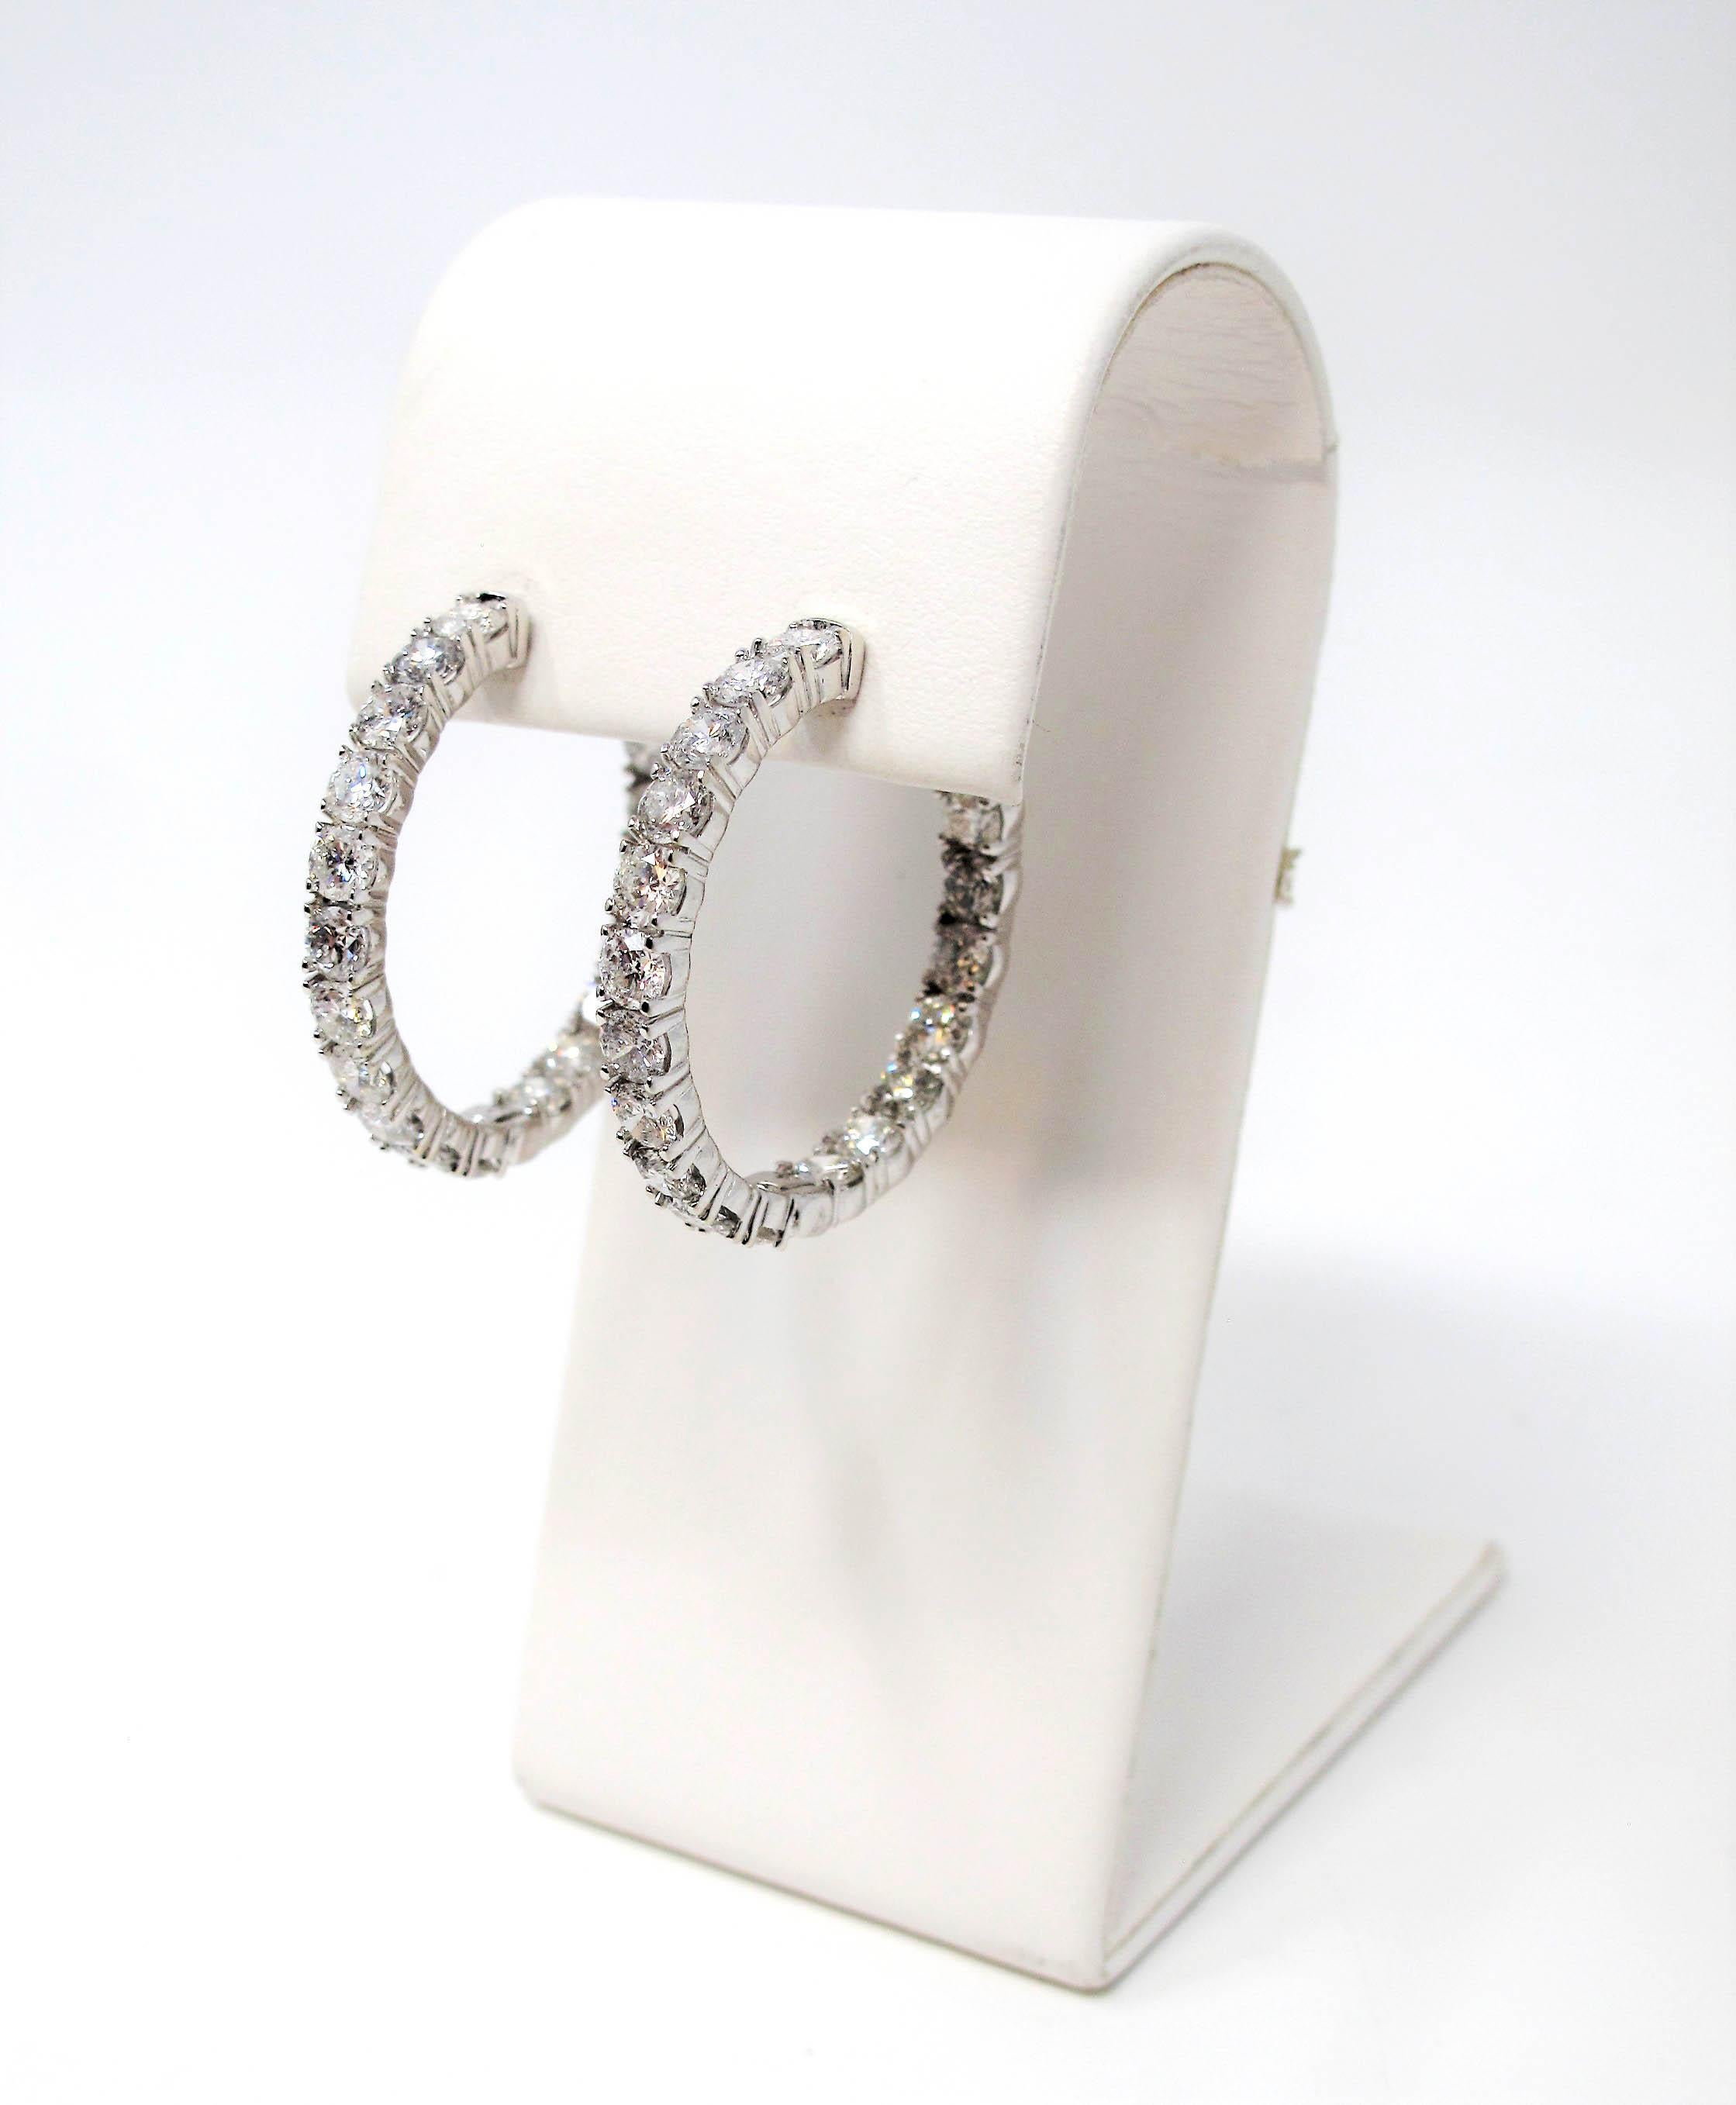 If you are looking for dazzling sparkle from every angle, these stunning diamond hoop earrings will not disappoint! Arranged in a unique inside/outside setting, the diamonds are positioned to catch the light from different angles. 

These gorgeous